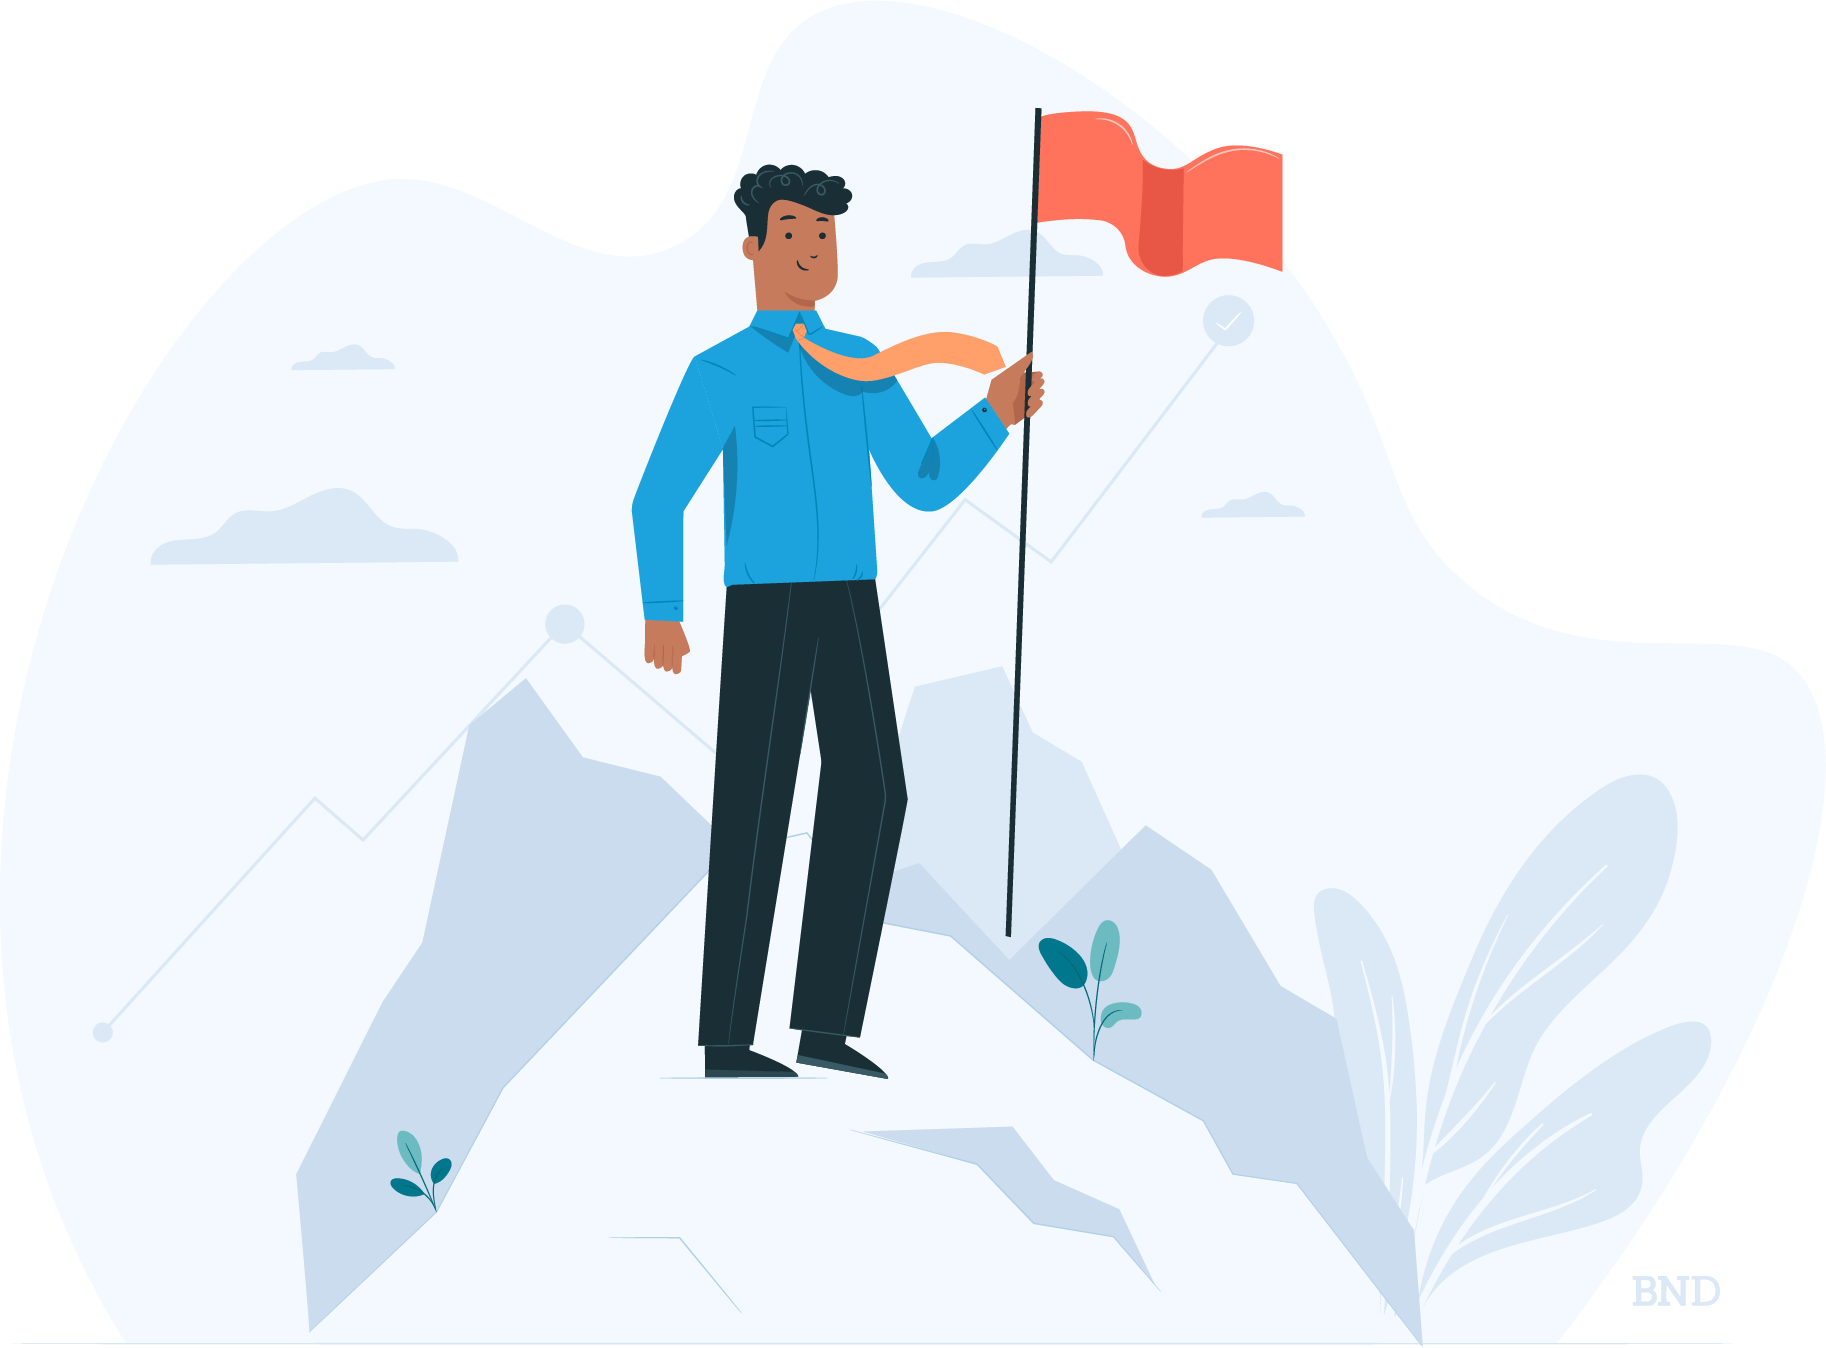 graphic of a person planting a flag on a mountain summit